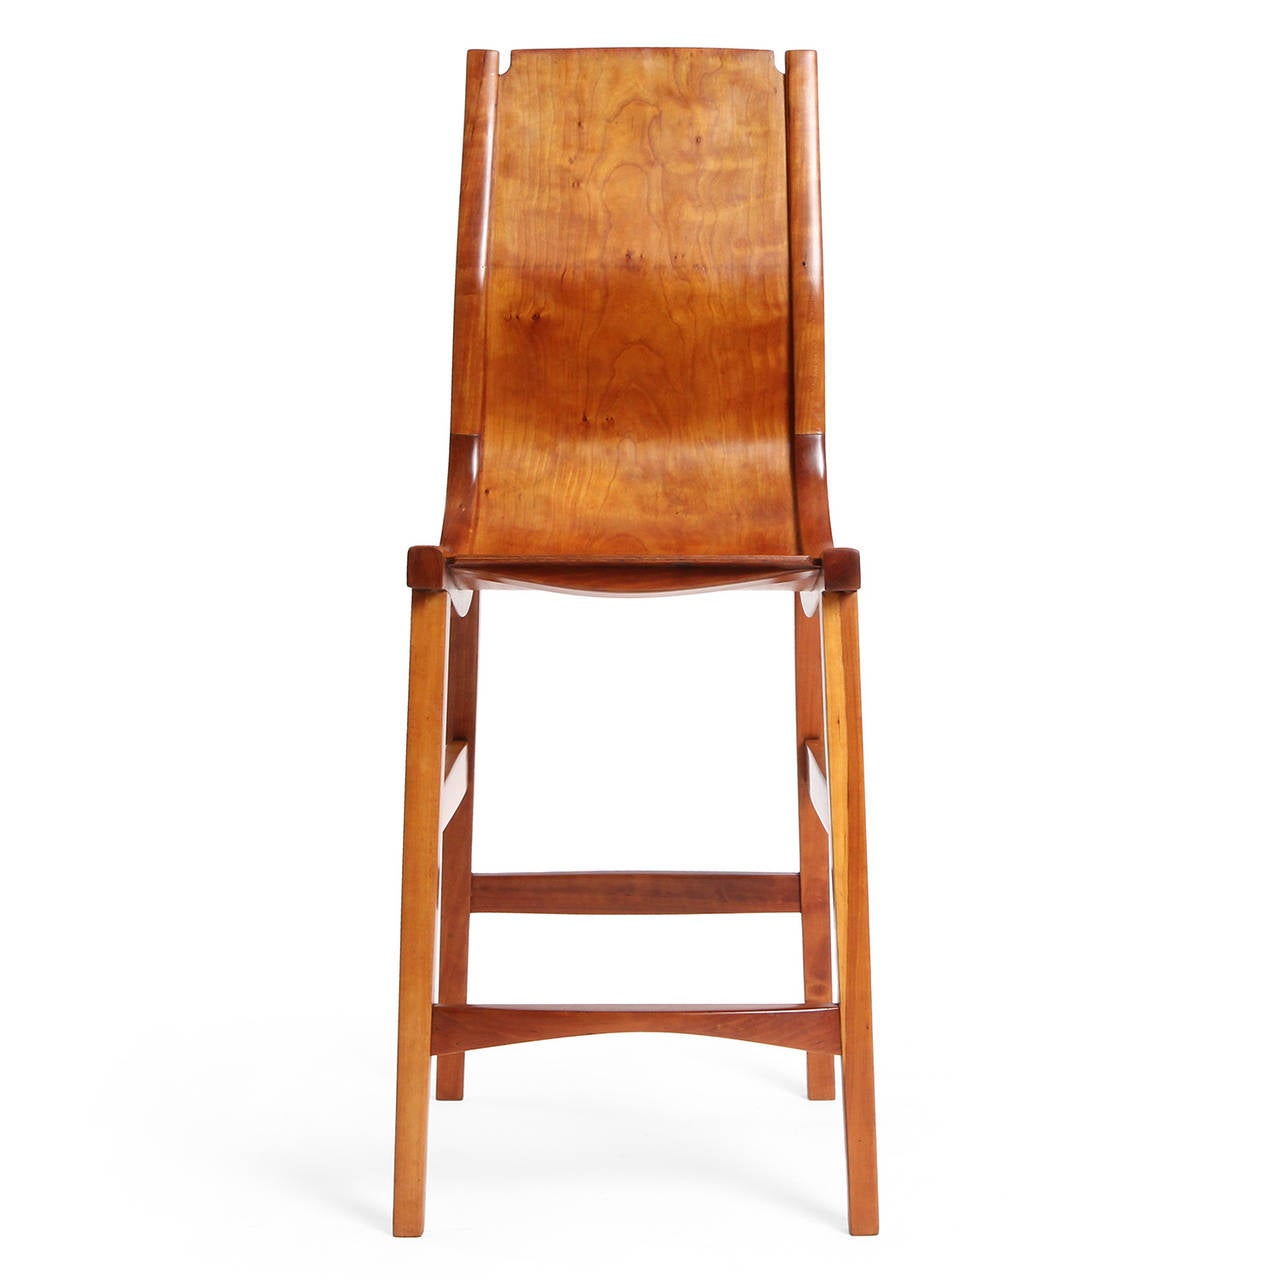 American Pair of Sculptural High Chairs by Jere Osgood